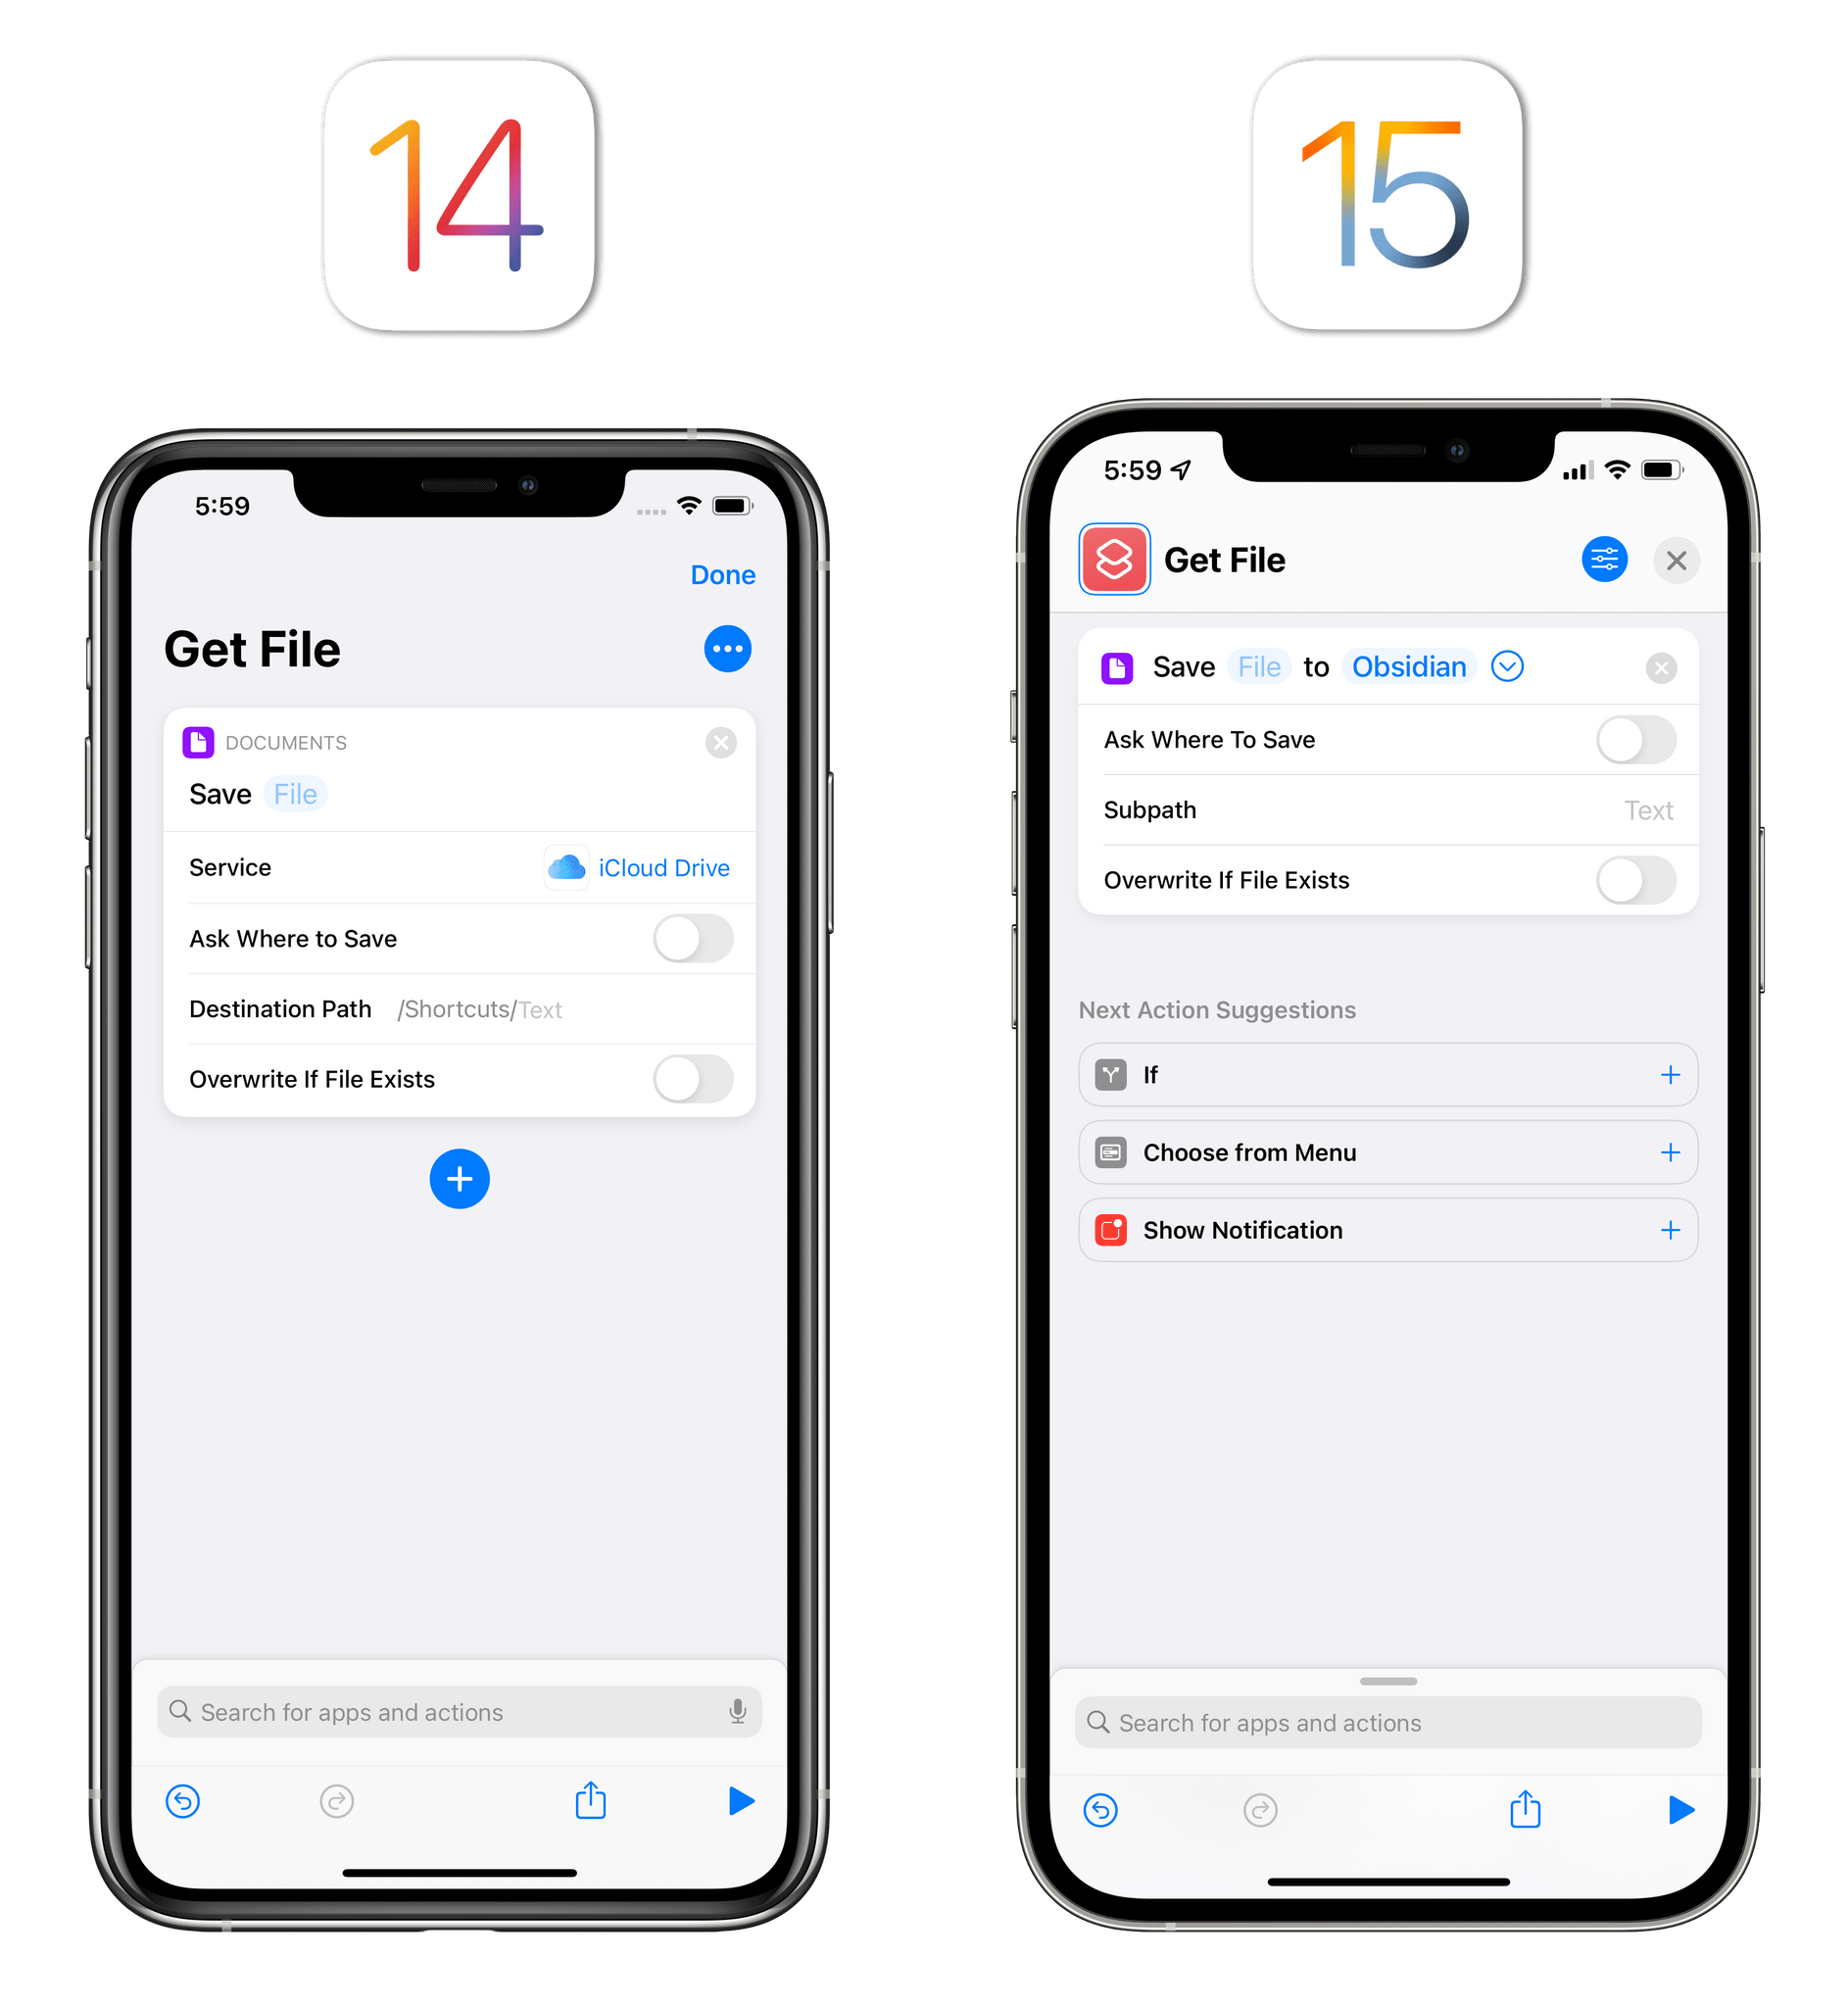 In iOS 15, you can work with any file or folder in Shortcuts.